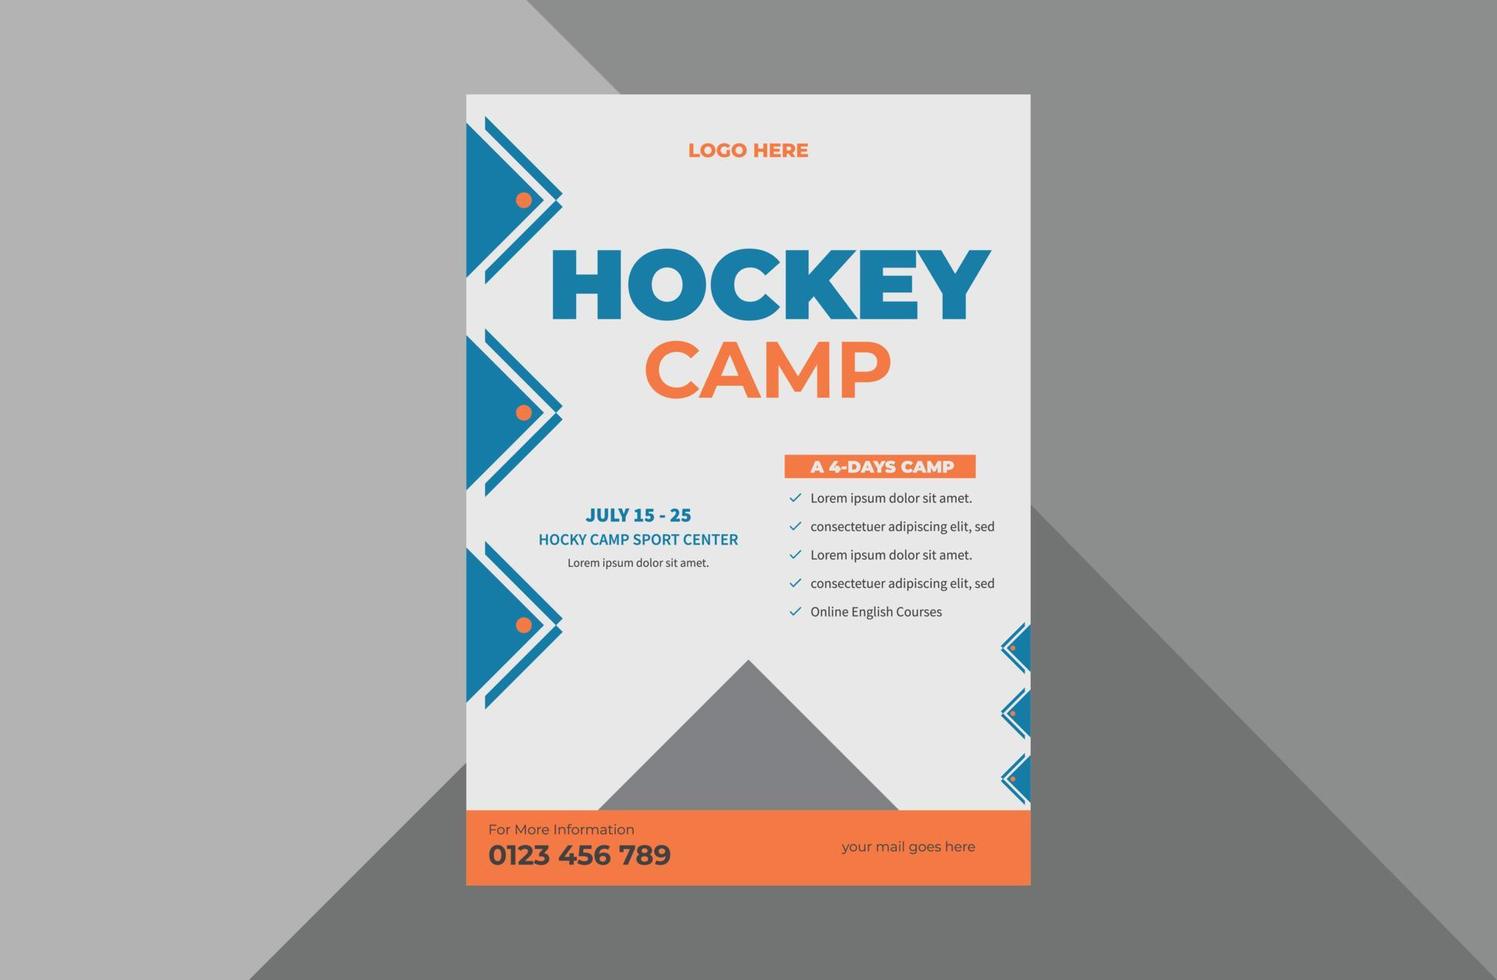 hockey camp flyer design template. sports event poster leaflet design. hockey sports flyer. a4 template, brochure design, cover, flyer, poster, print-ready vector